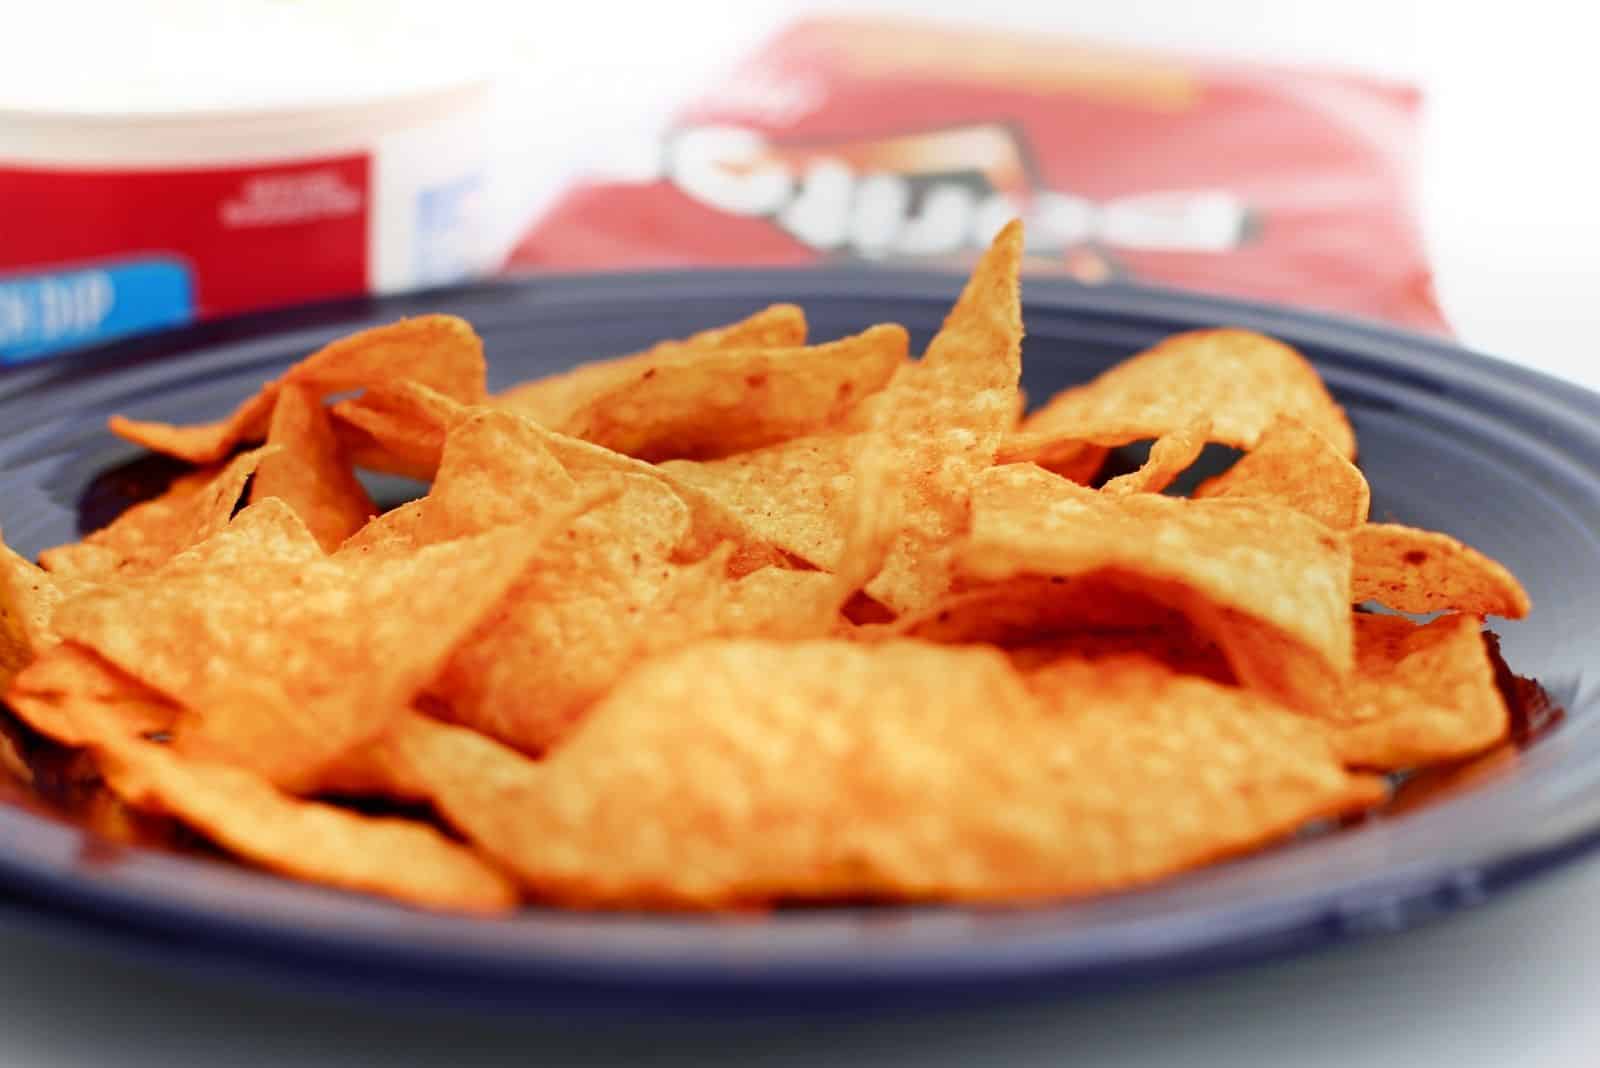 doritos chips in a plate